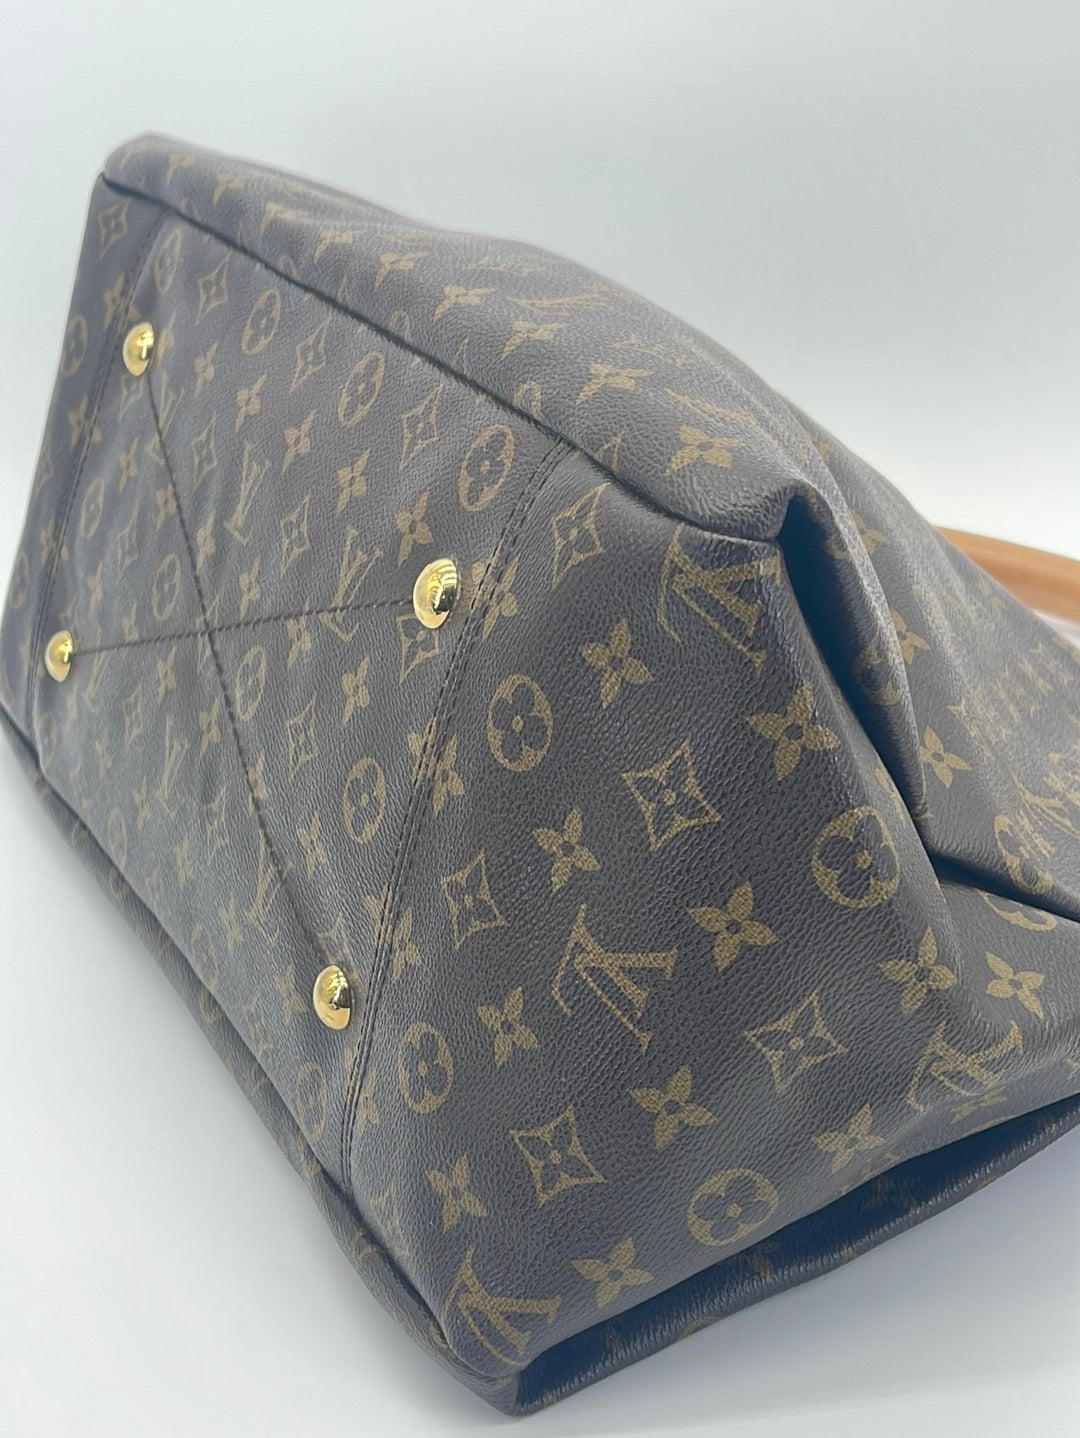 Authenticated Used Louis Vuitton M40259 Artsy GM Monogram Tote Bag